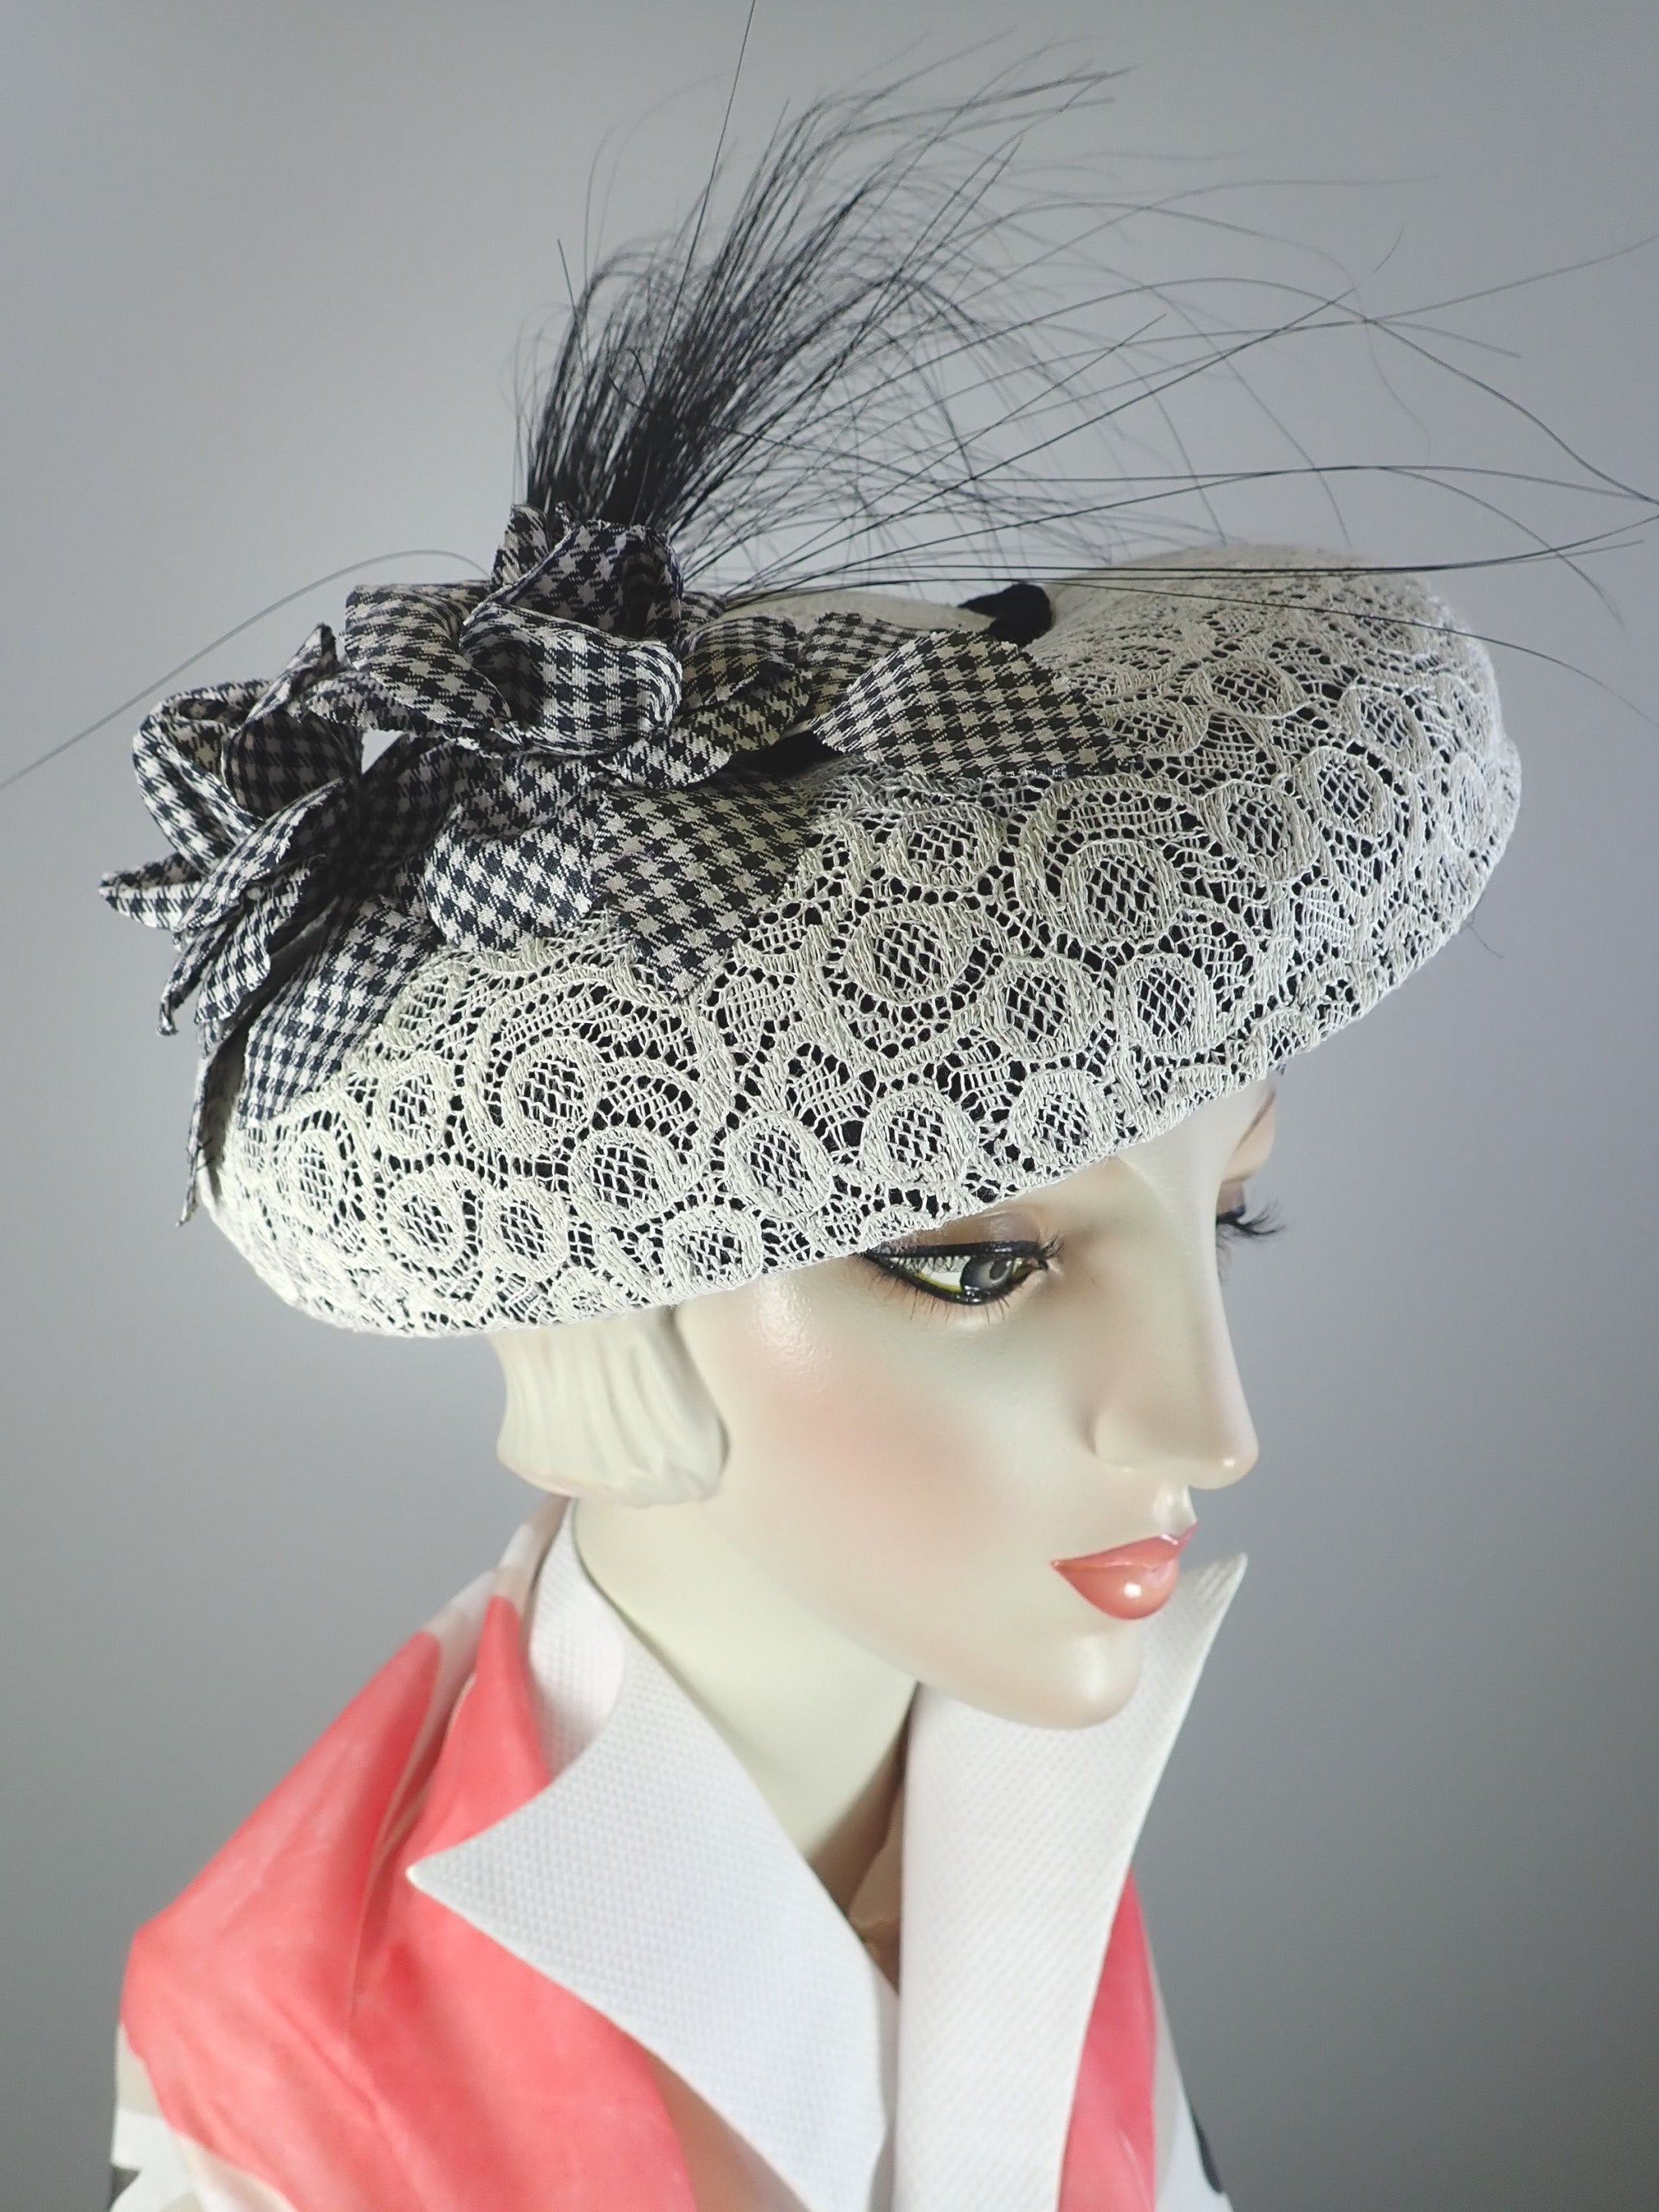 Vintage lace tilt hat with black and white flowers